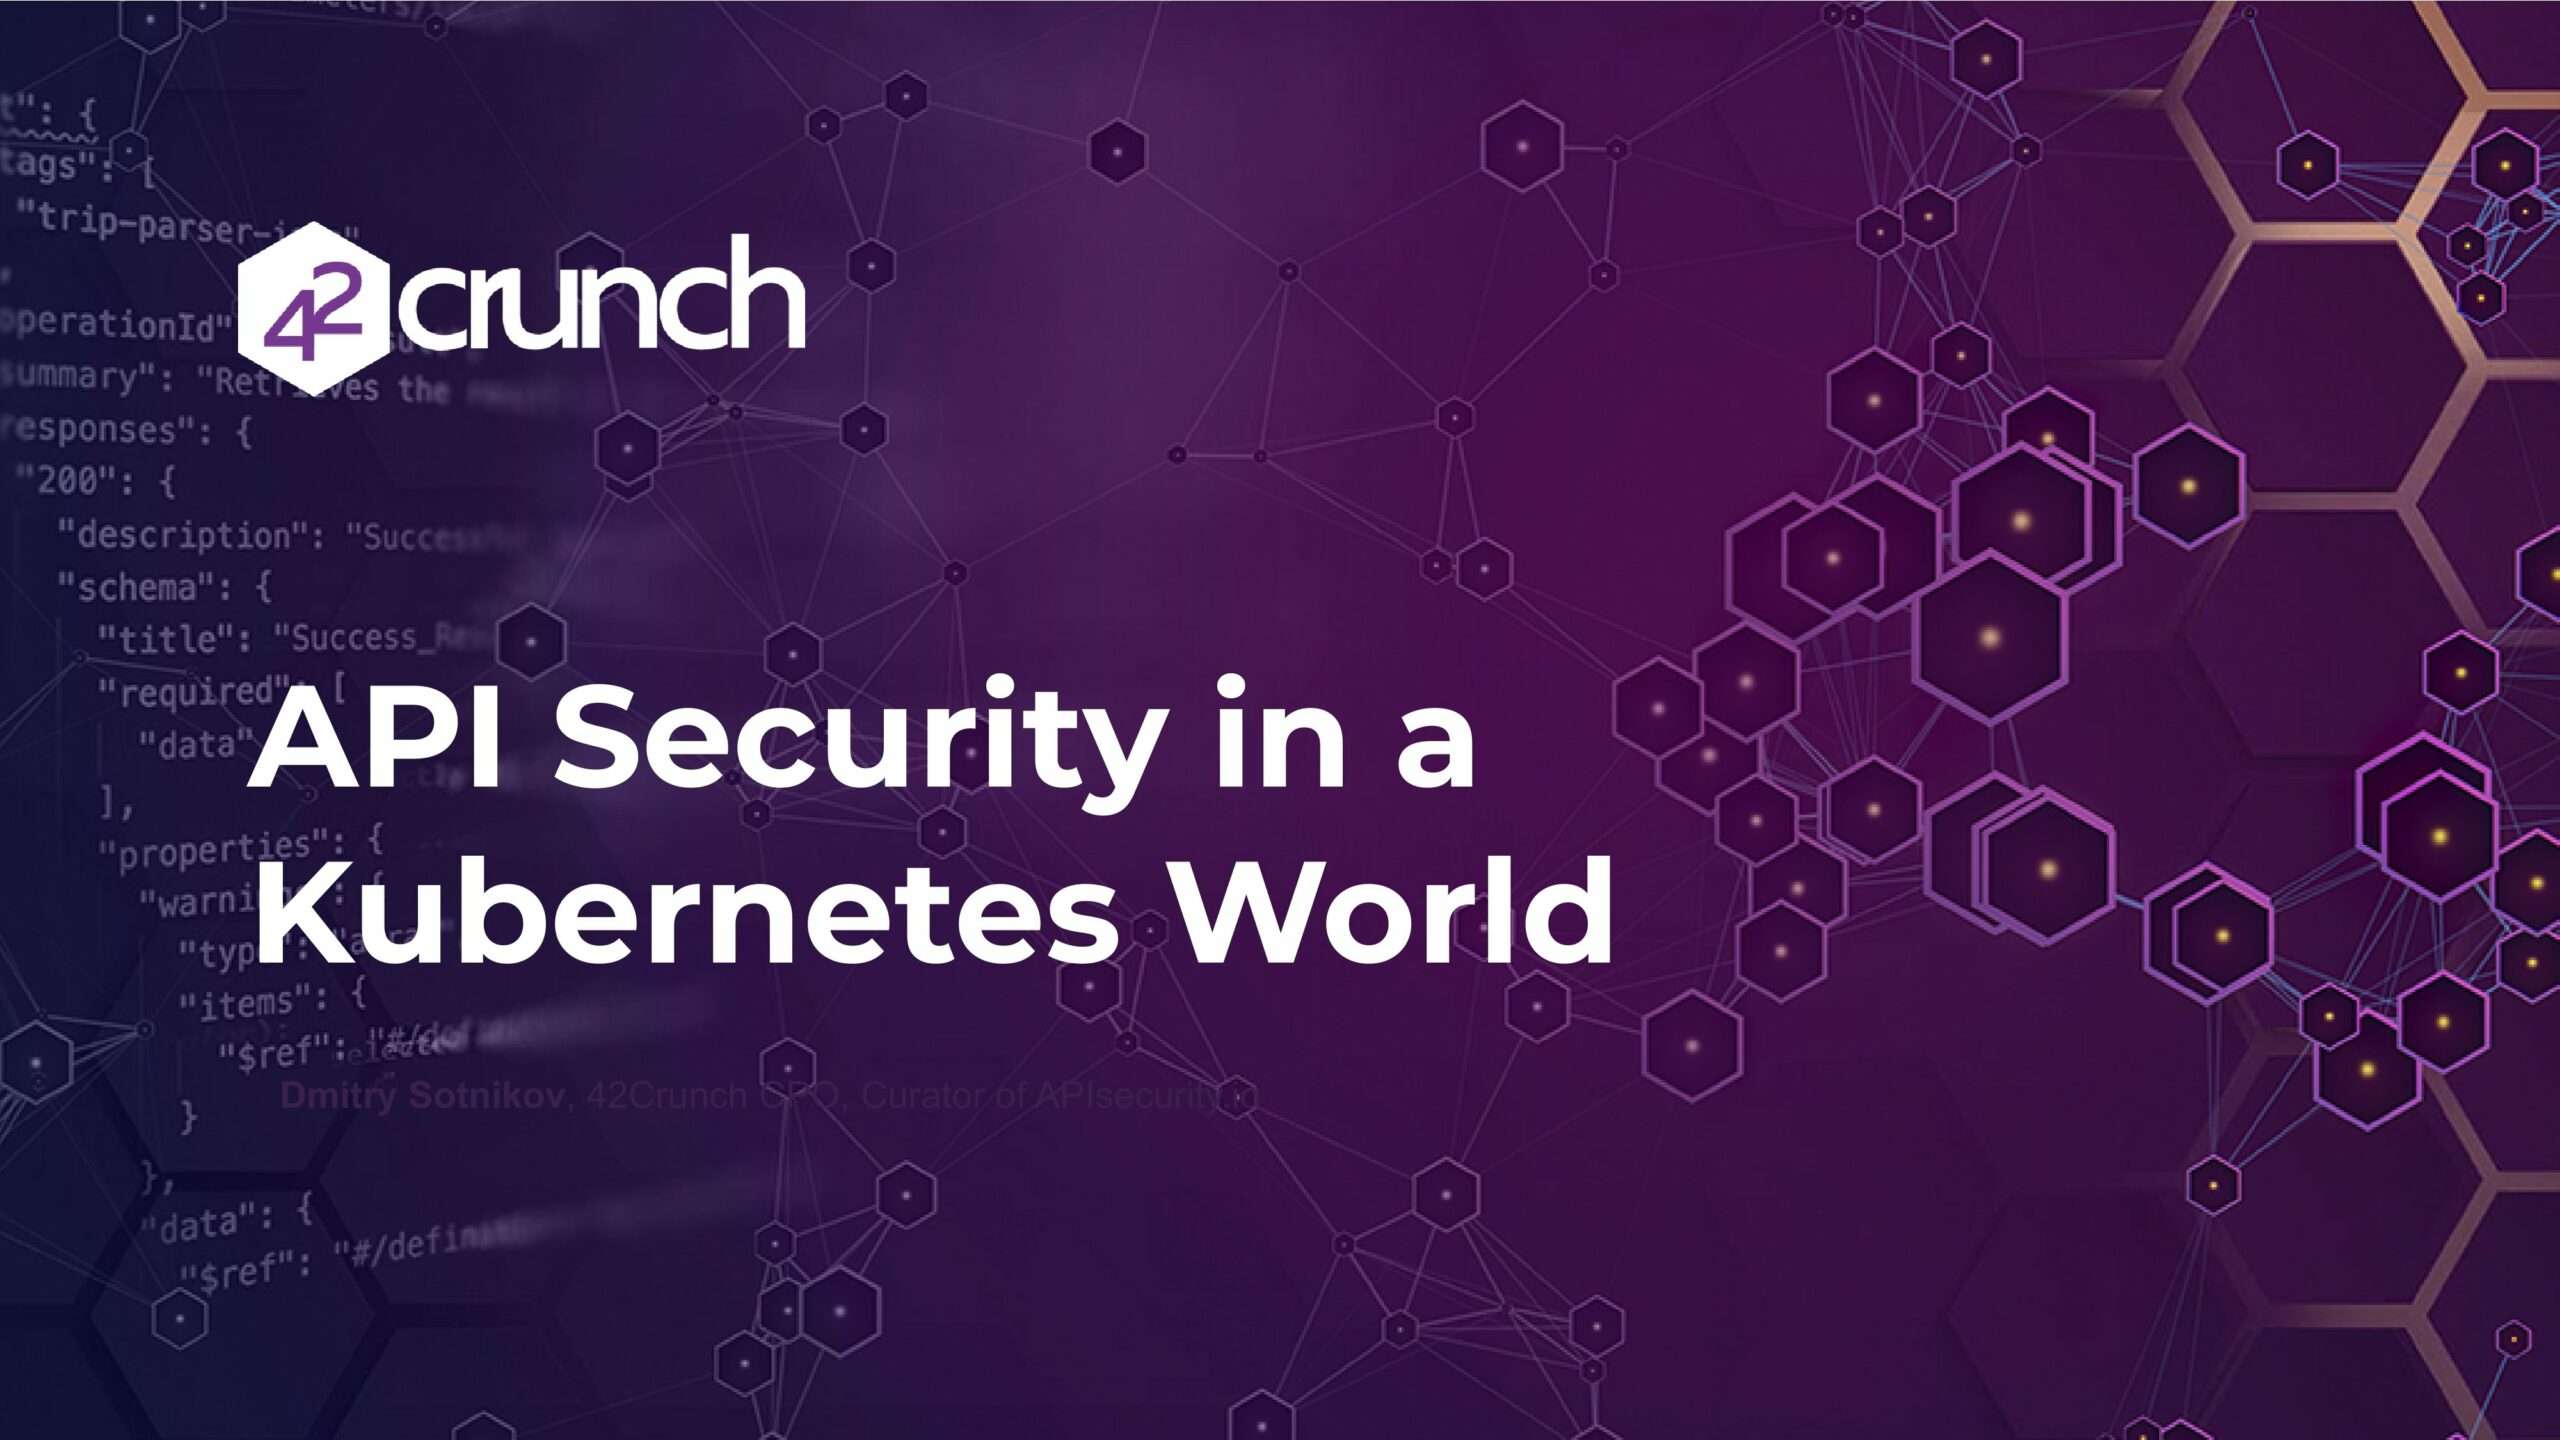 api-security-in-a-kubernetes-world0001-00